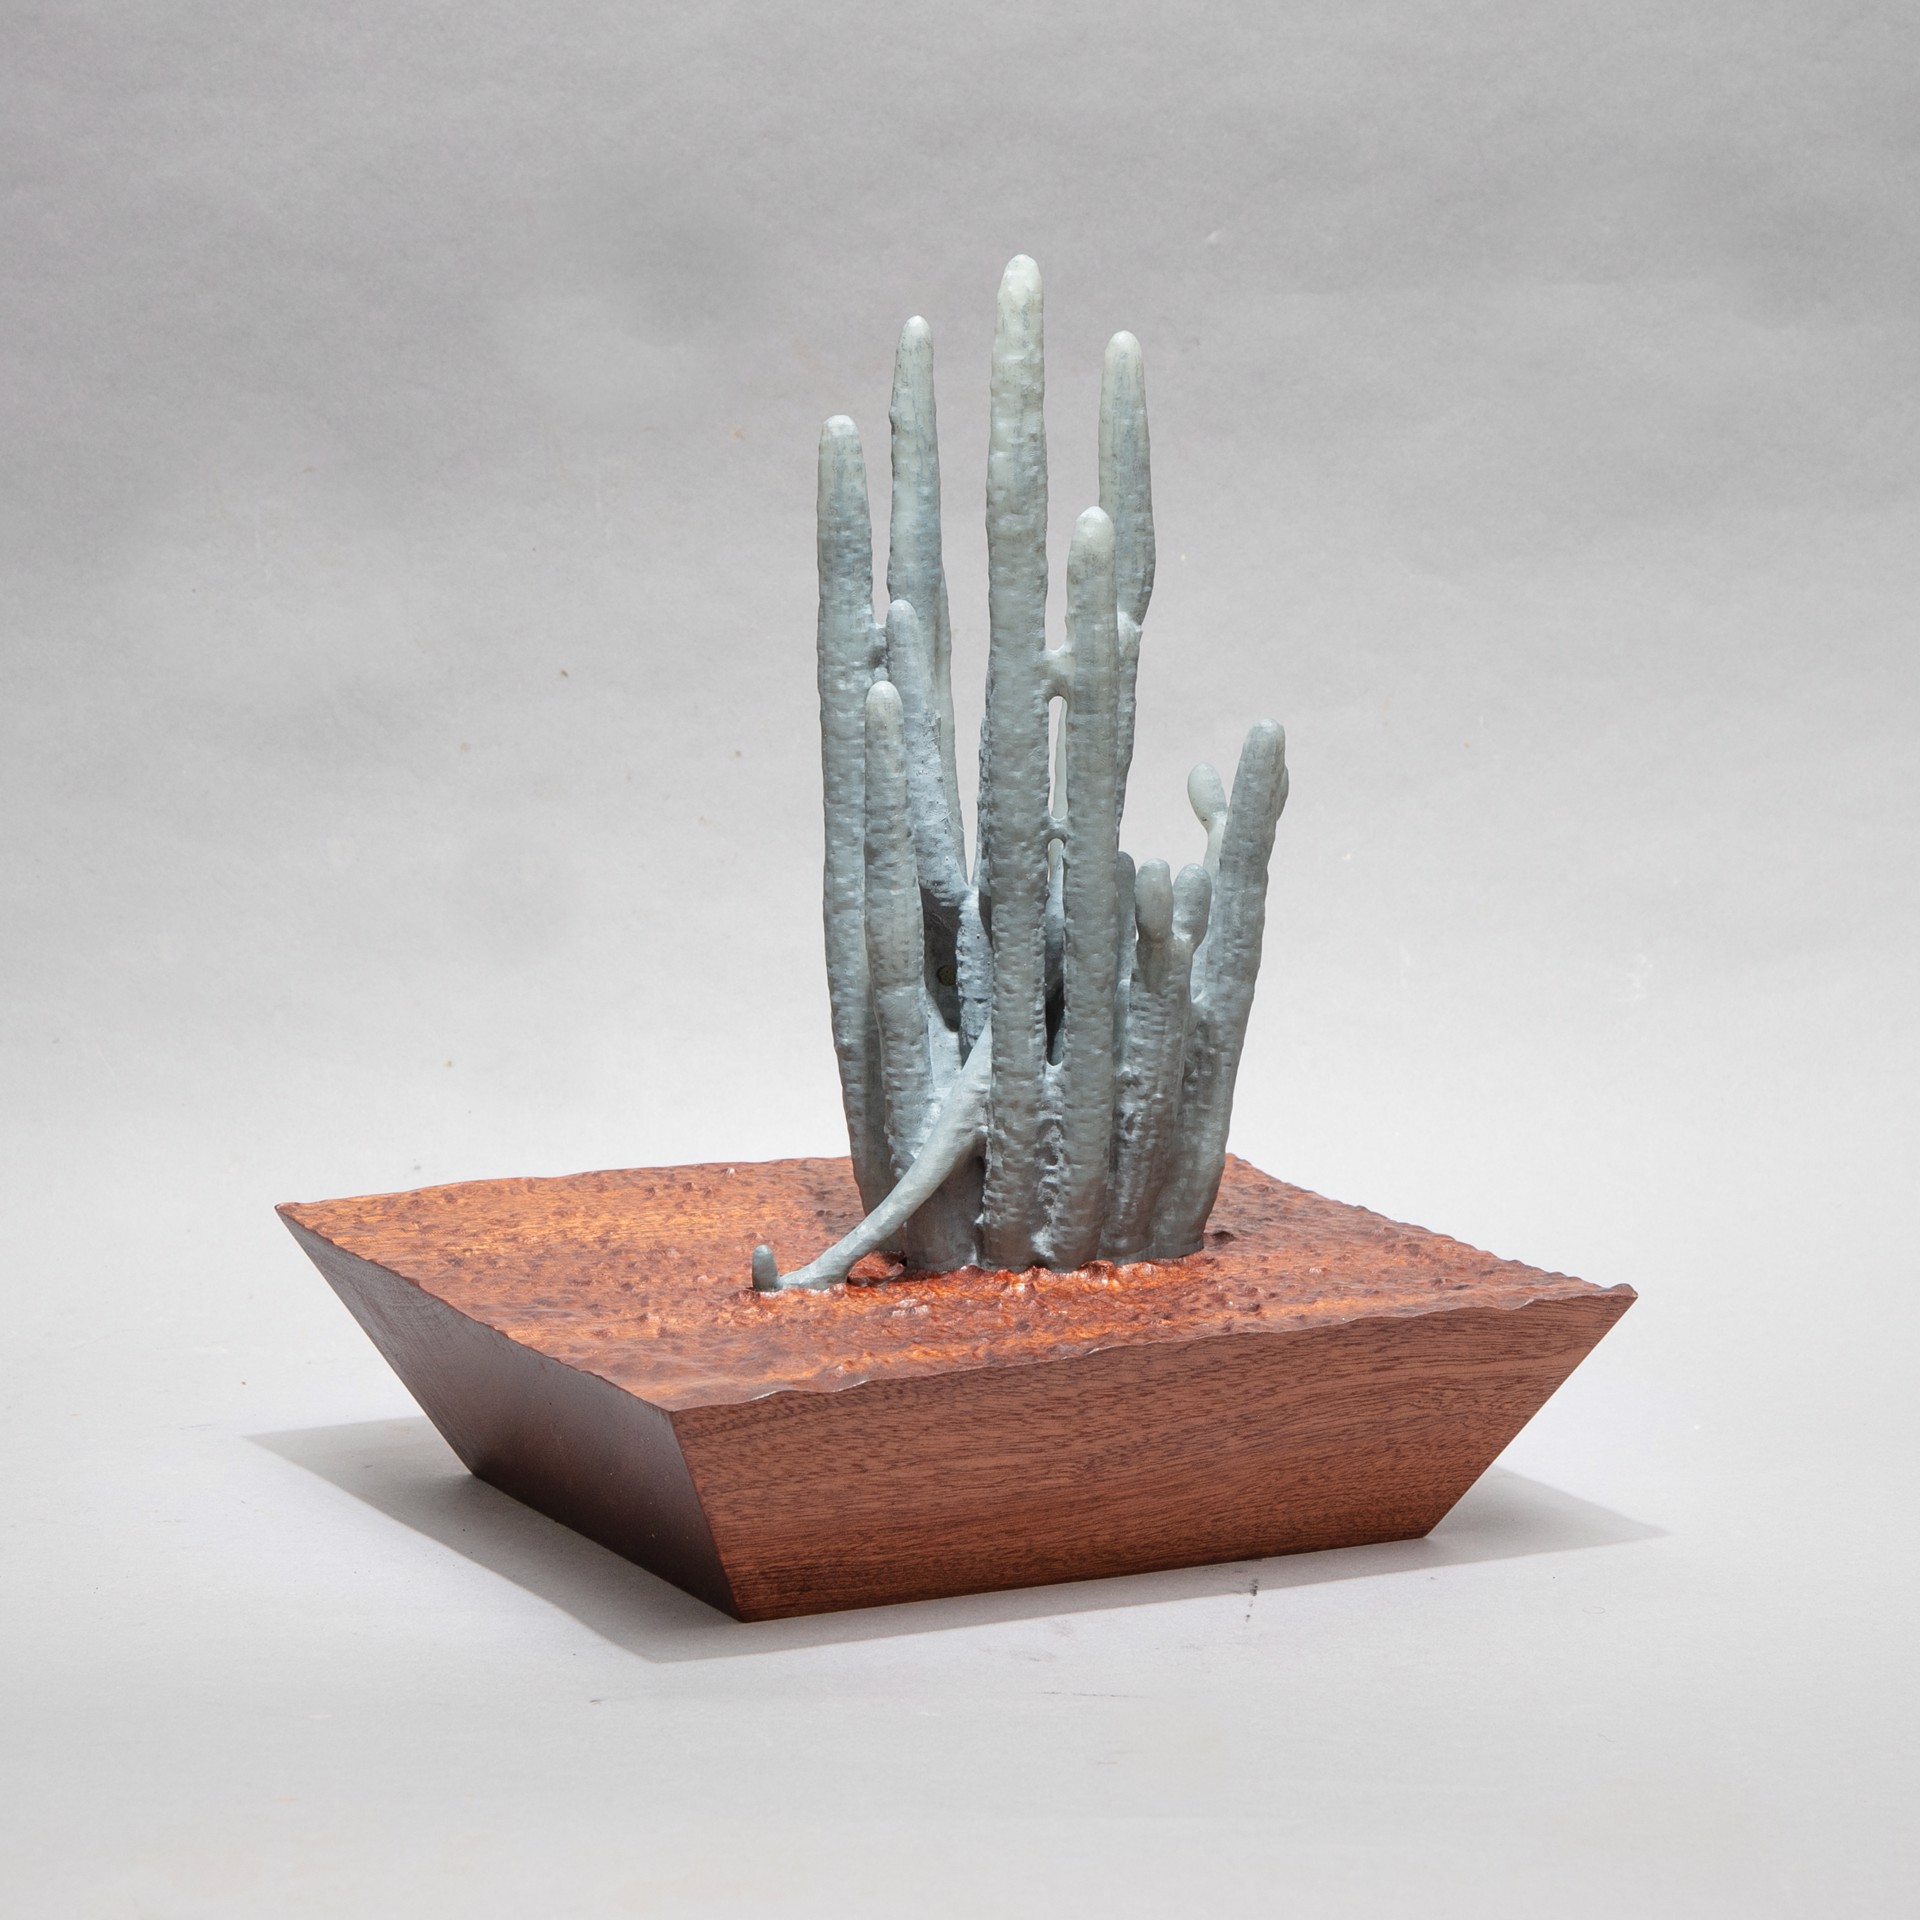 Specimen #8 - Organ pipe cactus in resin with sipo mahogany environment by Dana Younger